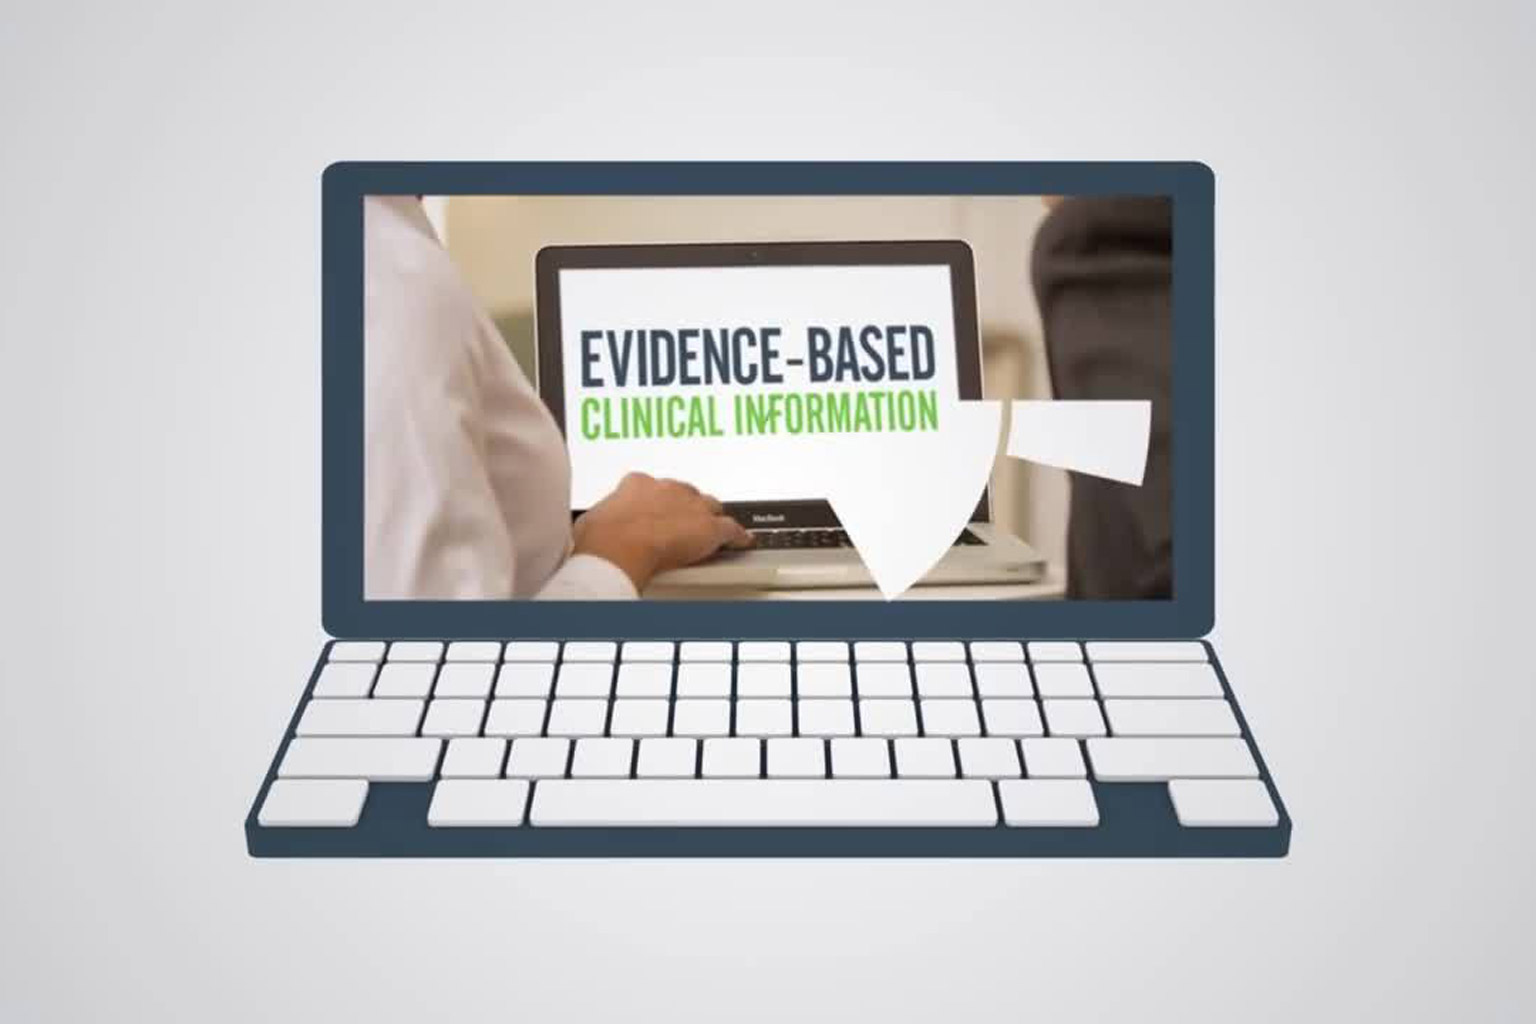 Learn how access to evidence-based clinical decision support improves healthcare outcomes.